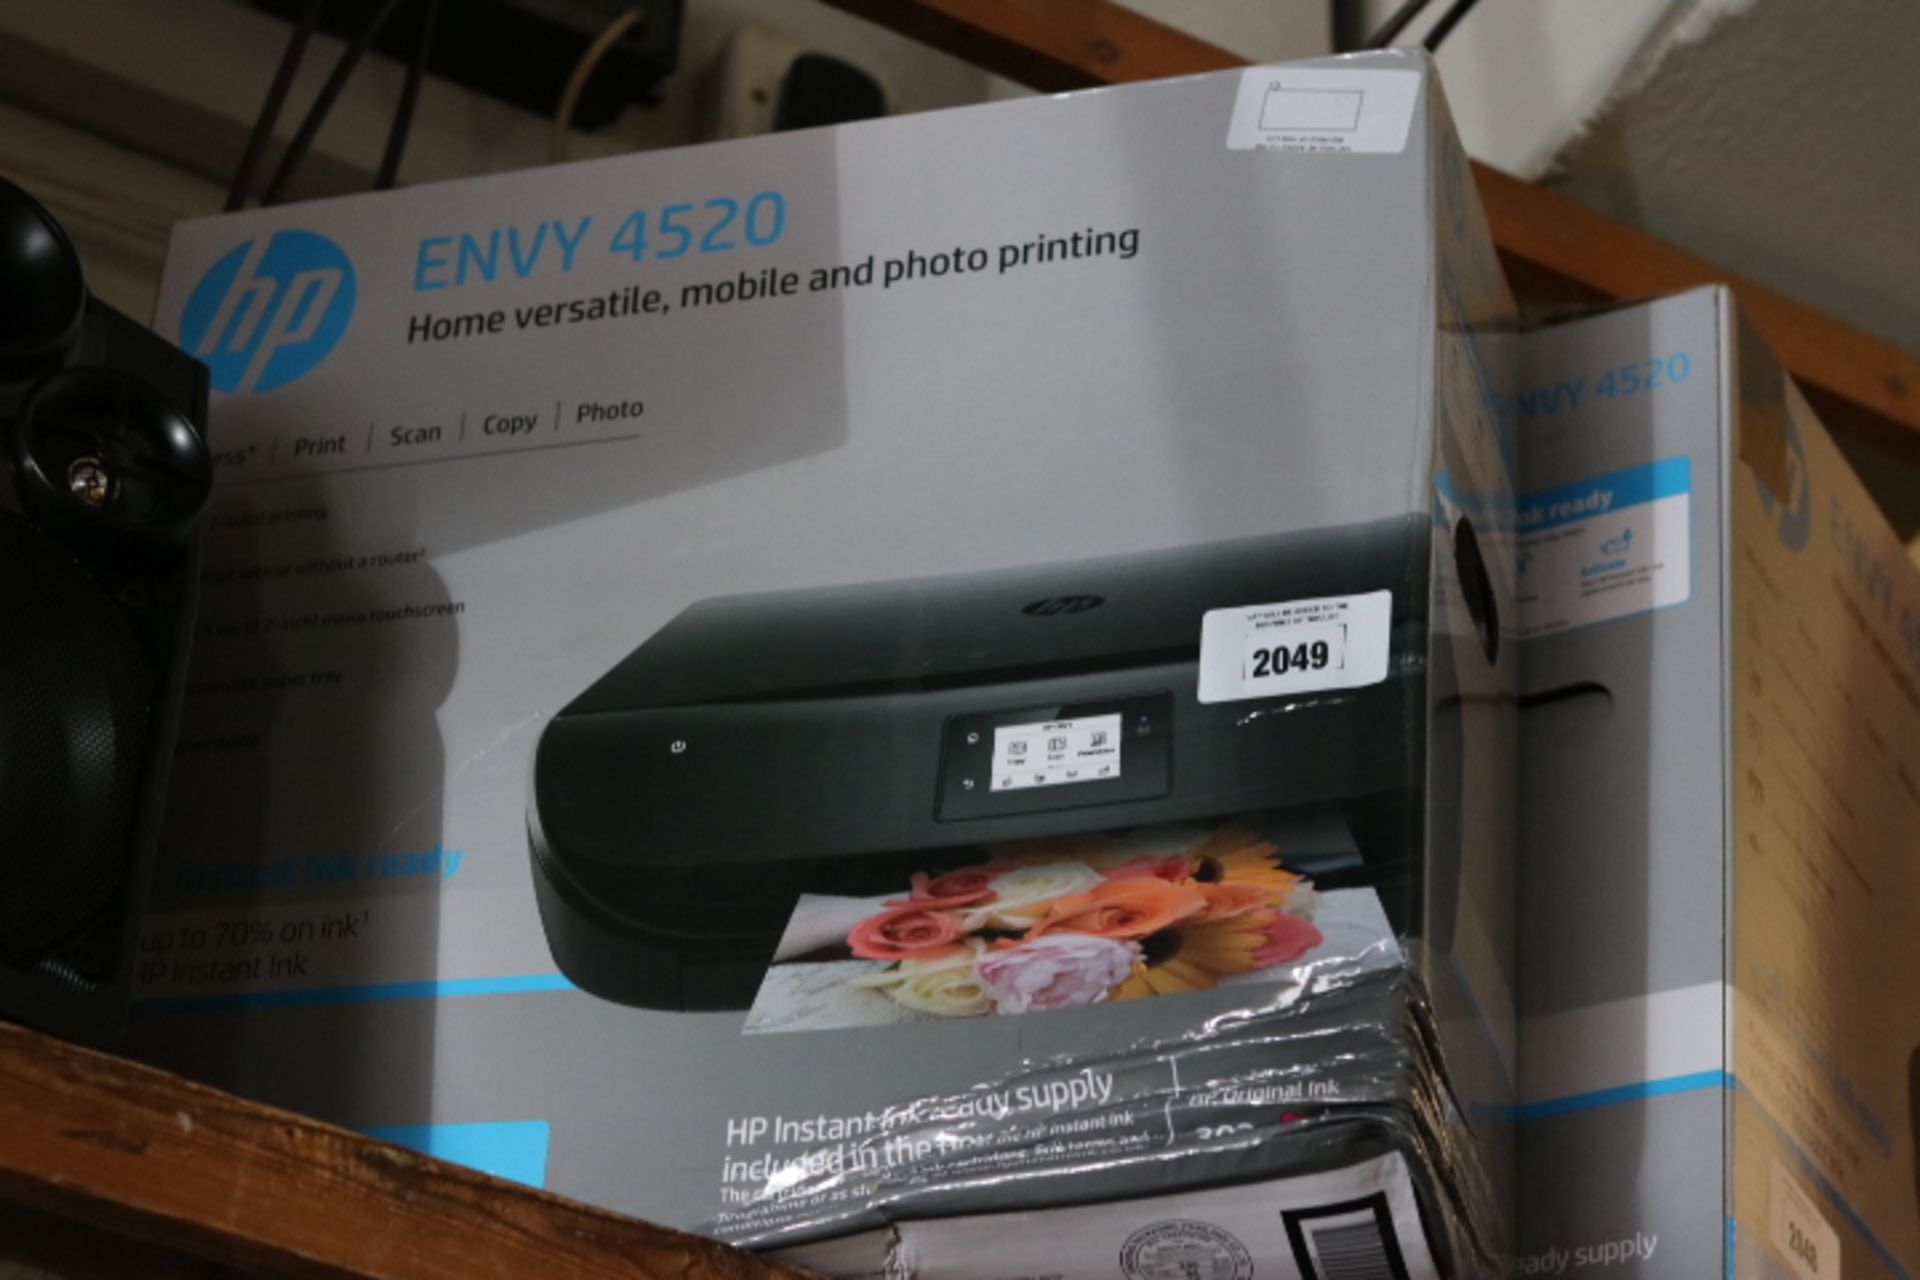 HP envy 4520 wireless all in one printer in the box